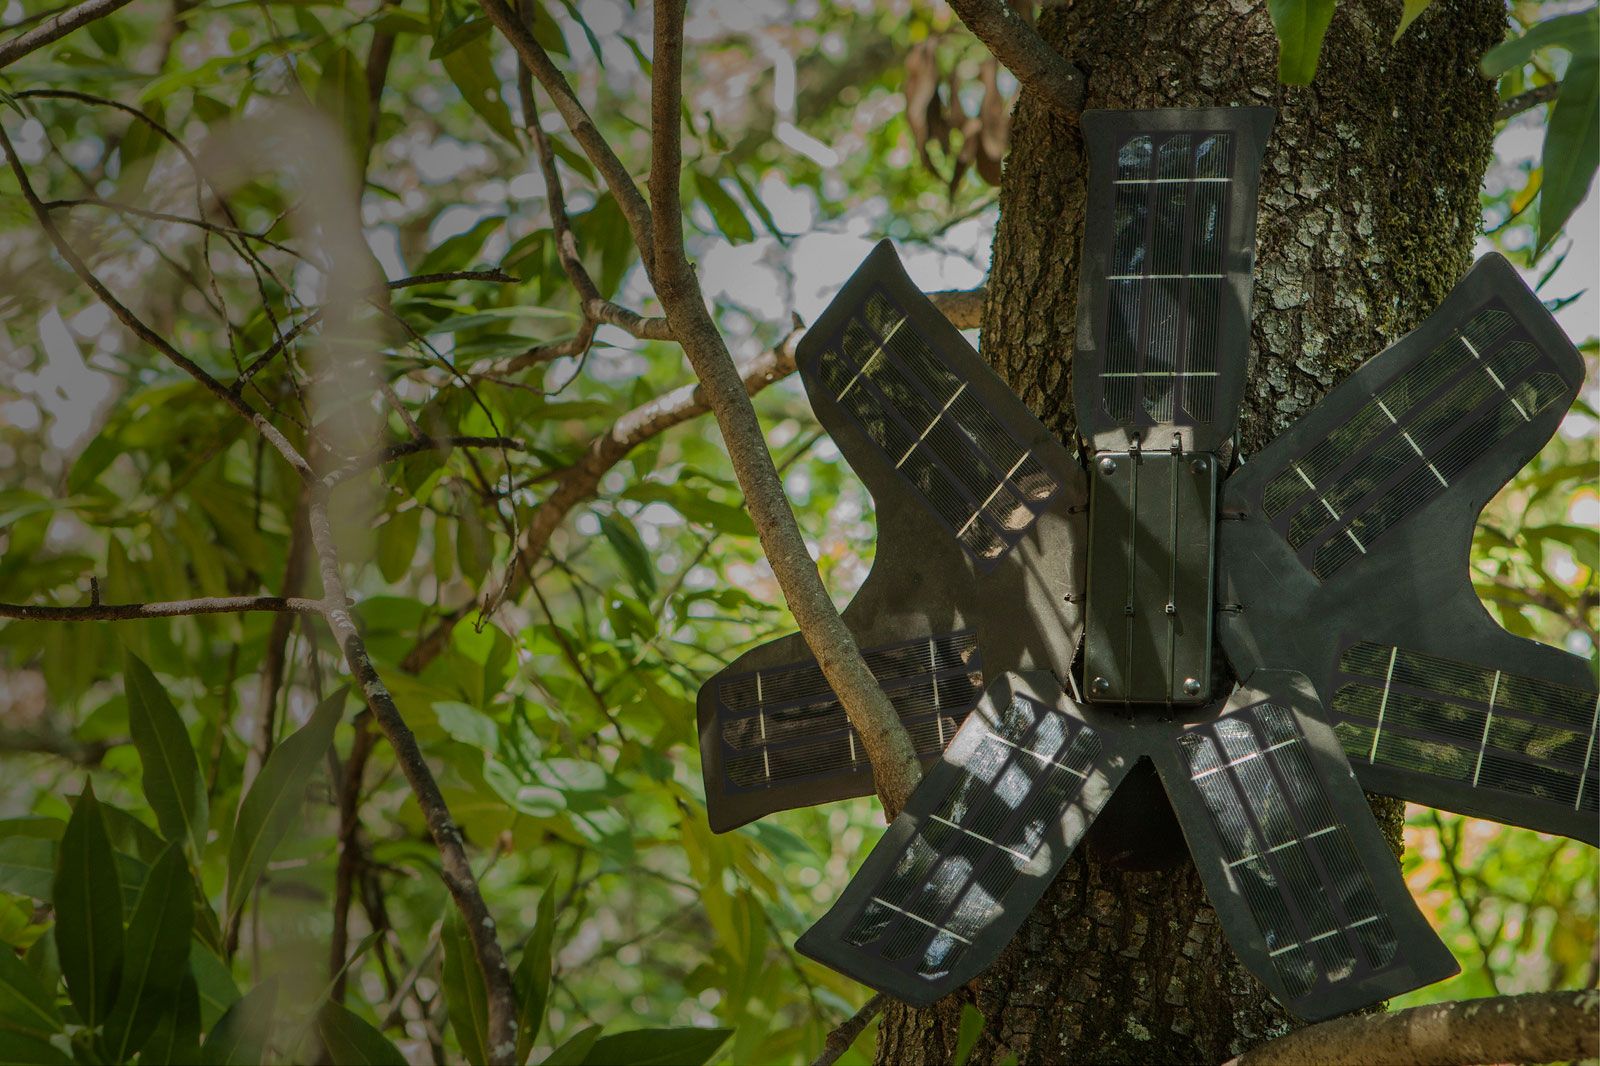 How Solar-Powered Recycled Smartphones Could Save the Rainforest